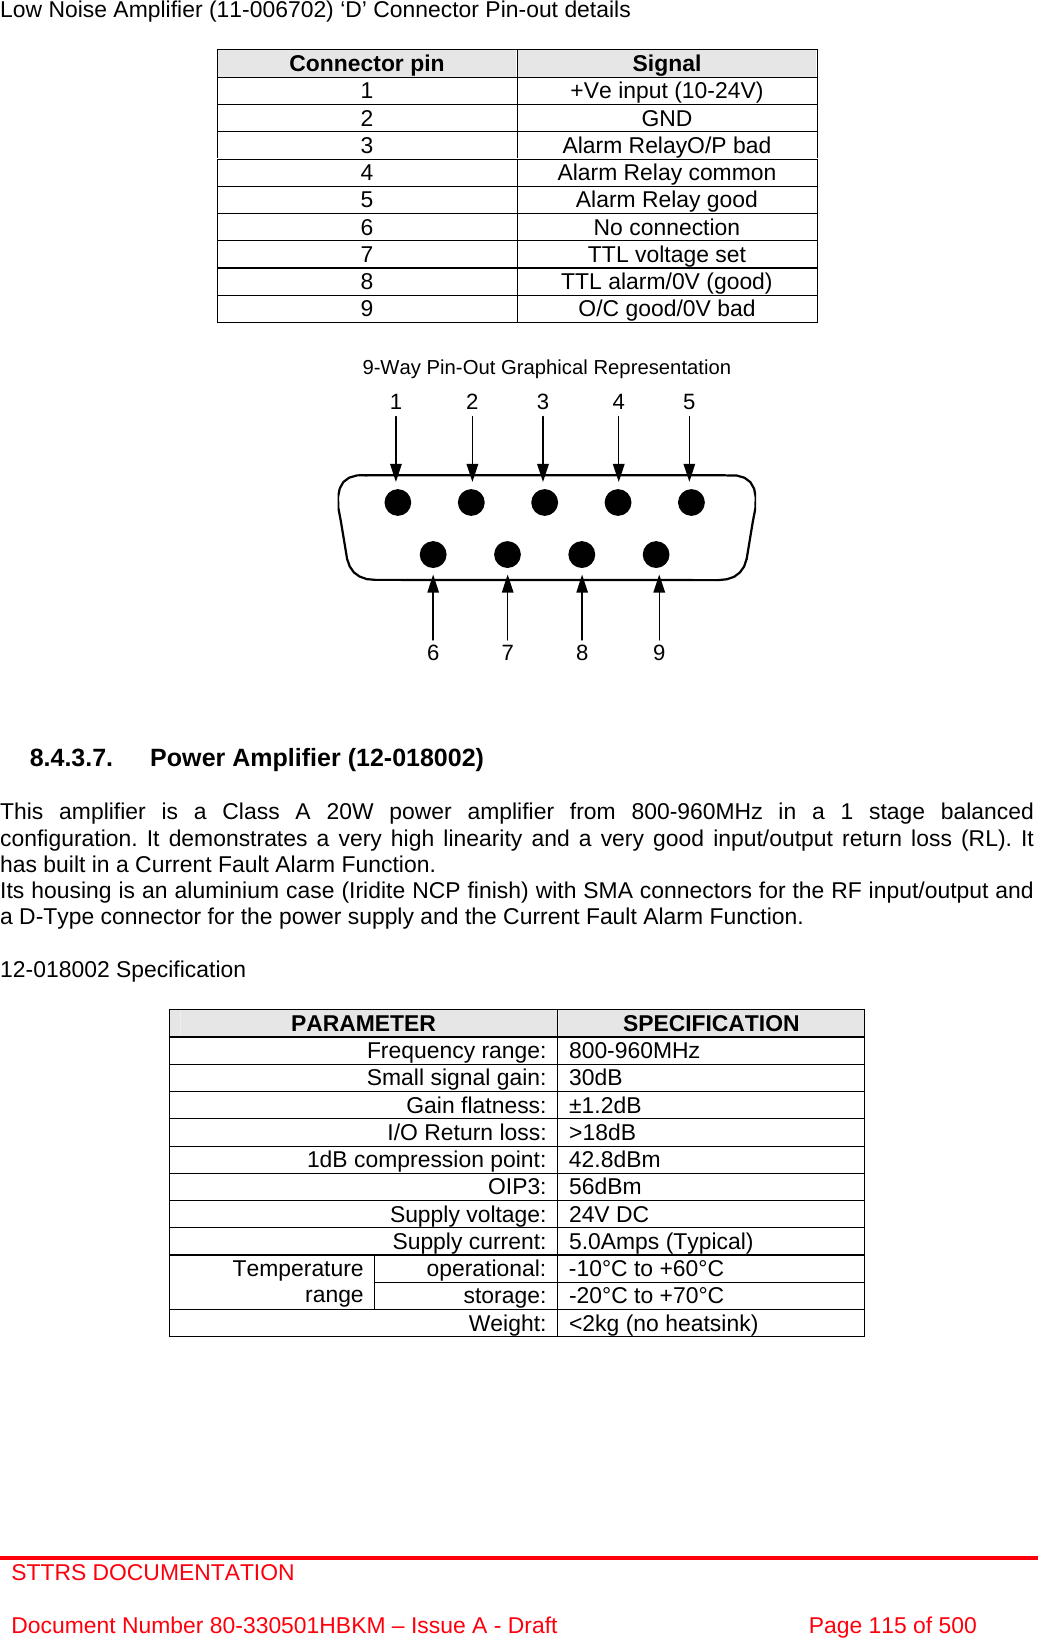 STTRS DOCUMENTATION  Document Number 80-330501HBKM – Issue A - Draft  Page 115 of 500  7 8 961 2 3 4 59-Way Pin-Out Graphical Representation Low Noise Amplifier (11-006702) ‘D’ Connector Pin-out details  Connector pin  Signal 1  +Ve input (10-24V) 2 GND 3  Alarm RelayO/P bad 4  Alarm Relay common 5  Alarm Relay good 6 No connection 7  TTL voltage set 8  TTL alarm/0V (good) 9  O/C good/0V bad                 8.4.3.7.  Power Amplifier (12-018002)  This amplifier is a Class A 20W power amplifier from 800-960MHz in a 1 stage balanced configuration. It demonstrates a very high linearity and a very good input/output return loss (RL). It has built in a Current Fault Alarm Function. Its housing is an aluminium case (Iridite NCP finish) with SMA connectors for the RF input/output and a D-Type connector for the power supply and the Current Fault Alarm Function.  12-018002 Specification  PARAMETER  SPECIFICATION Frequency range: 800-960MHz Small signal gain: 30dB Gain flatness: ±1.2dB I/O Return loss: &gt;18dB 1dB compression point: 42.8dBm OIP3: 56dBm Supply voltage: 24V DC Supply current: 5.0Amps (Typical) operational: -10°C to +60°C Temperature range  storage: -20°C to +70°C Weight: &lt;2kg (no heatsink)  